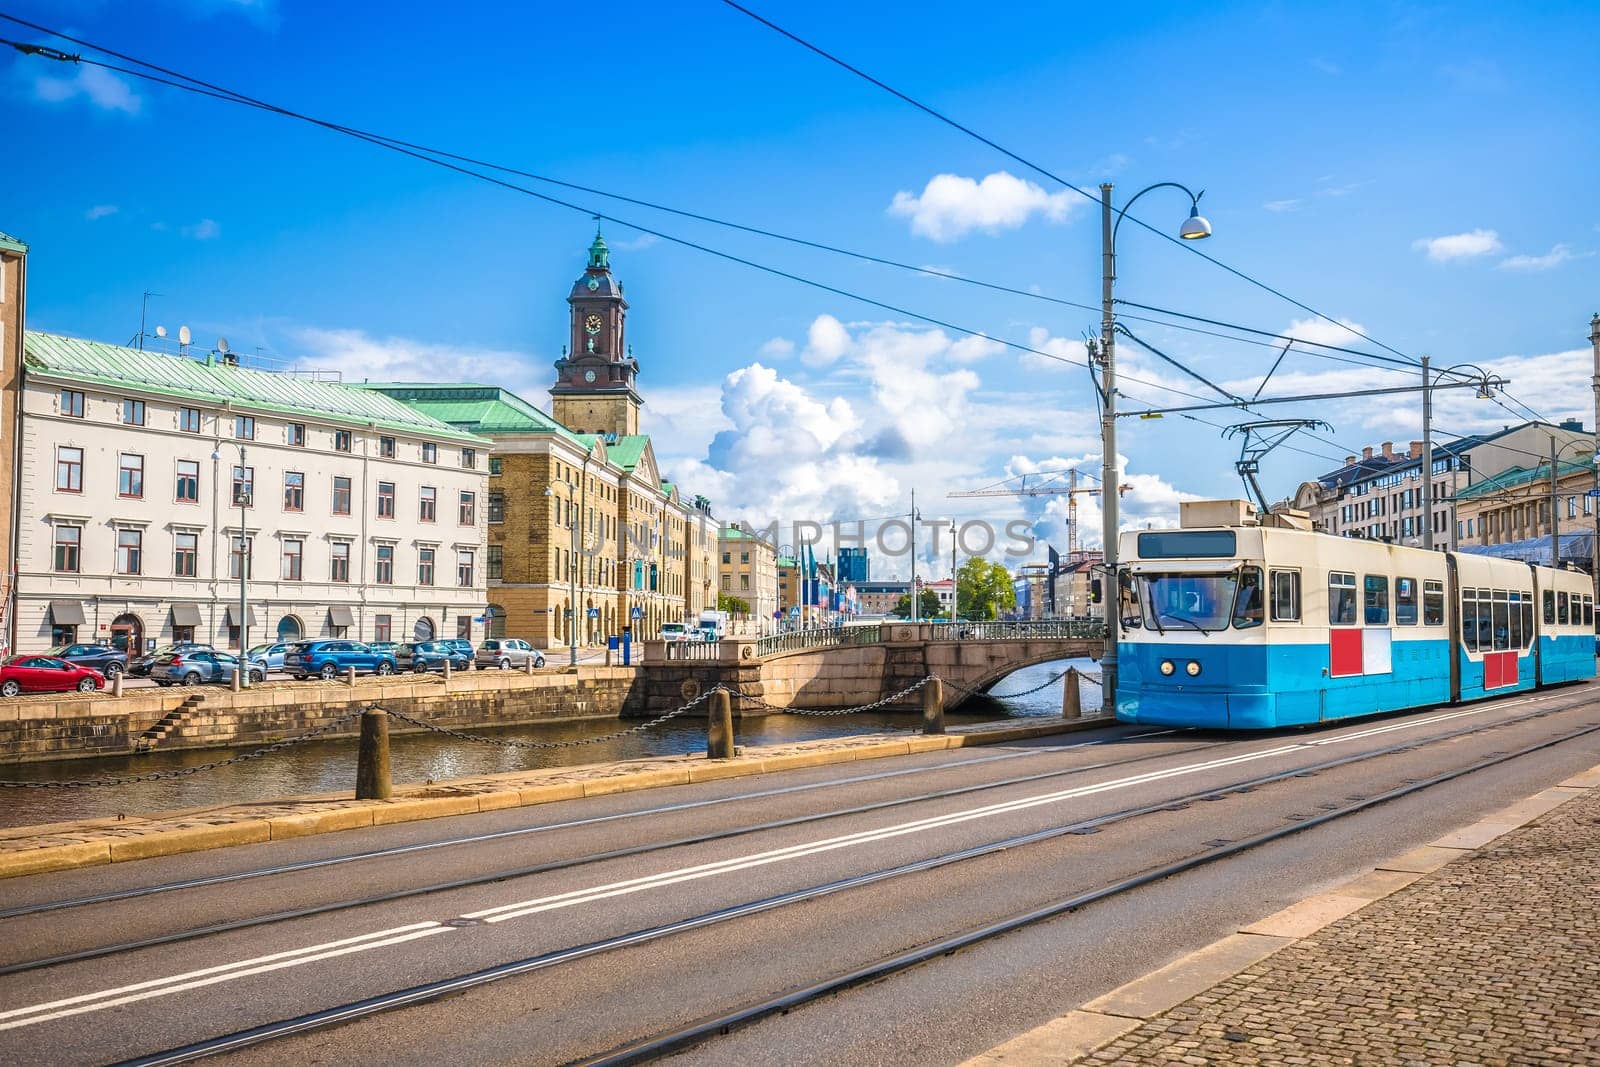 City of Gothenburg architecture and tram view by xbrchx